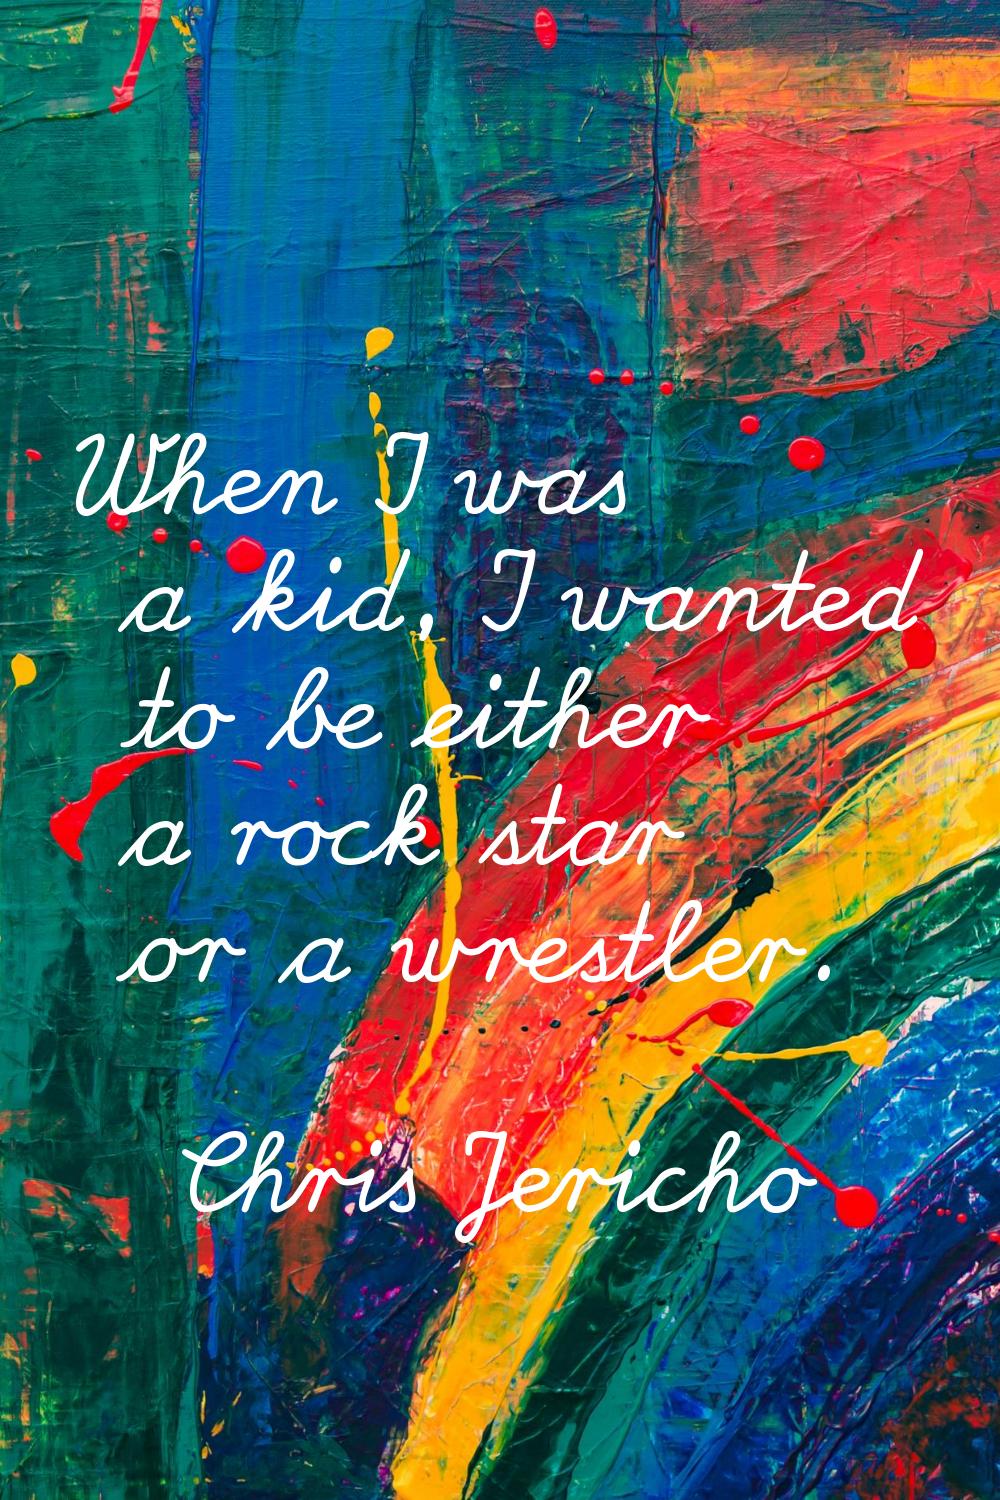 When I was a kid, I wanted to be either a rock star or a wrestler.